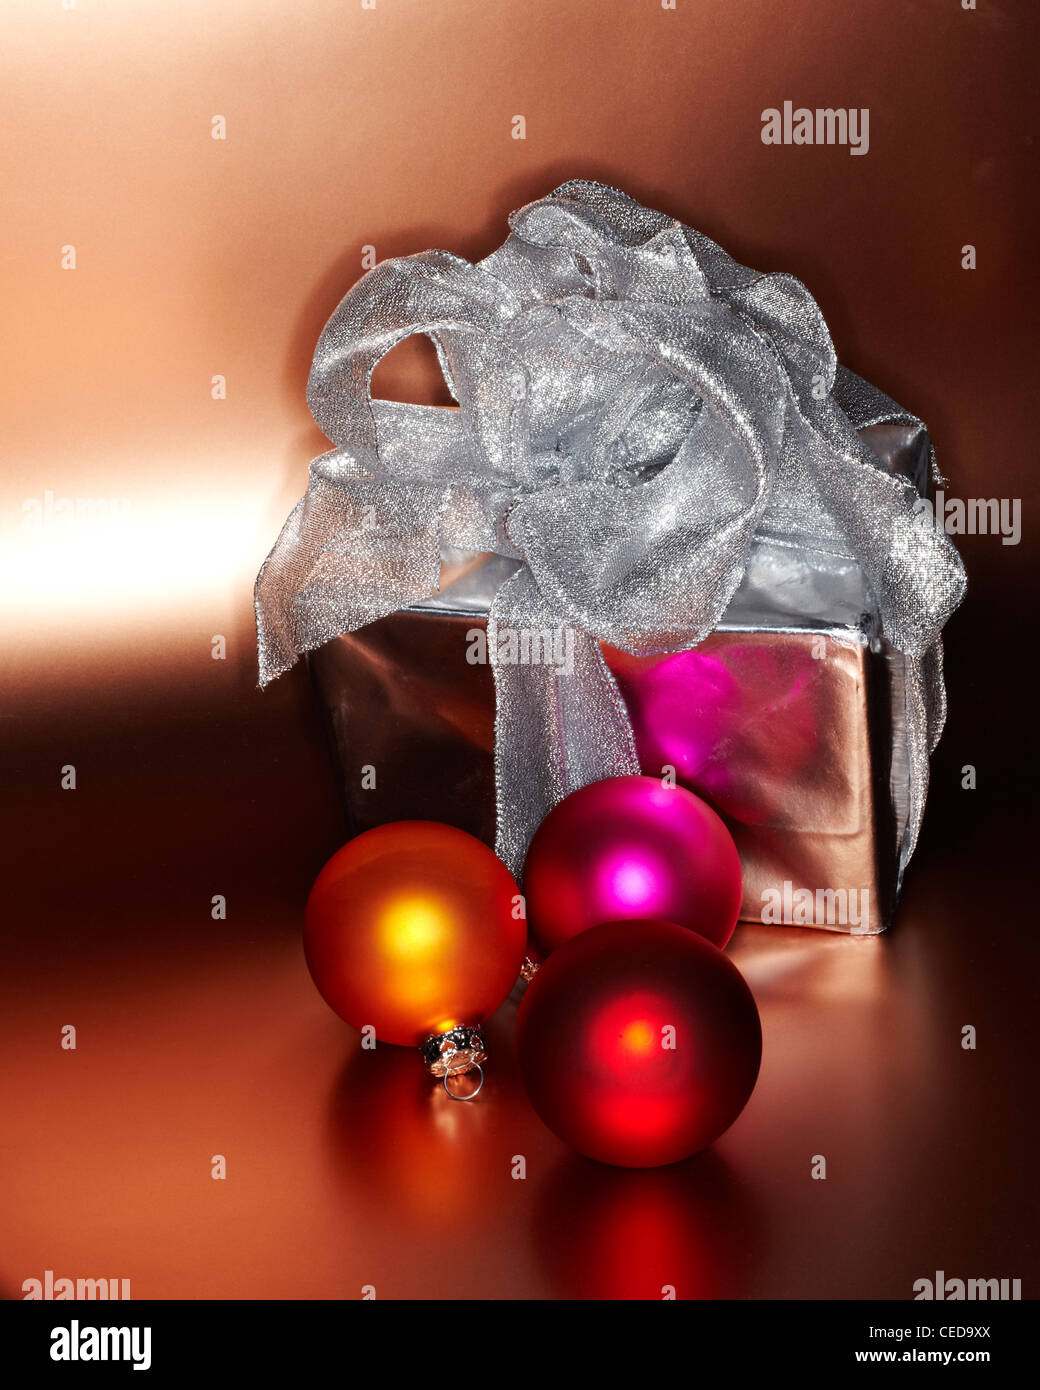 Festive Christmas gift with colored ornaments Stock Photo